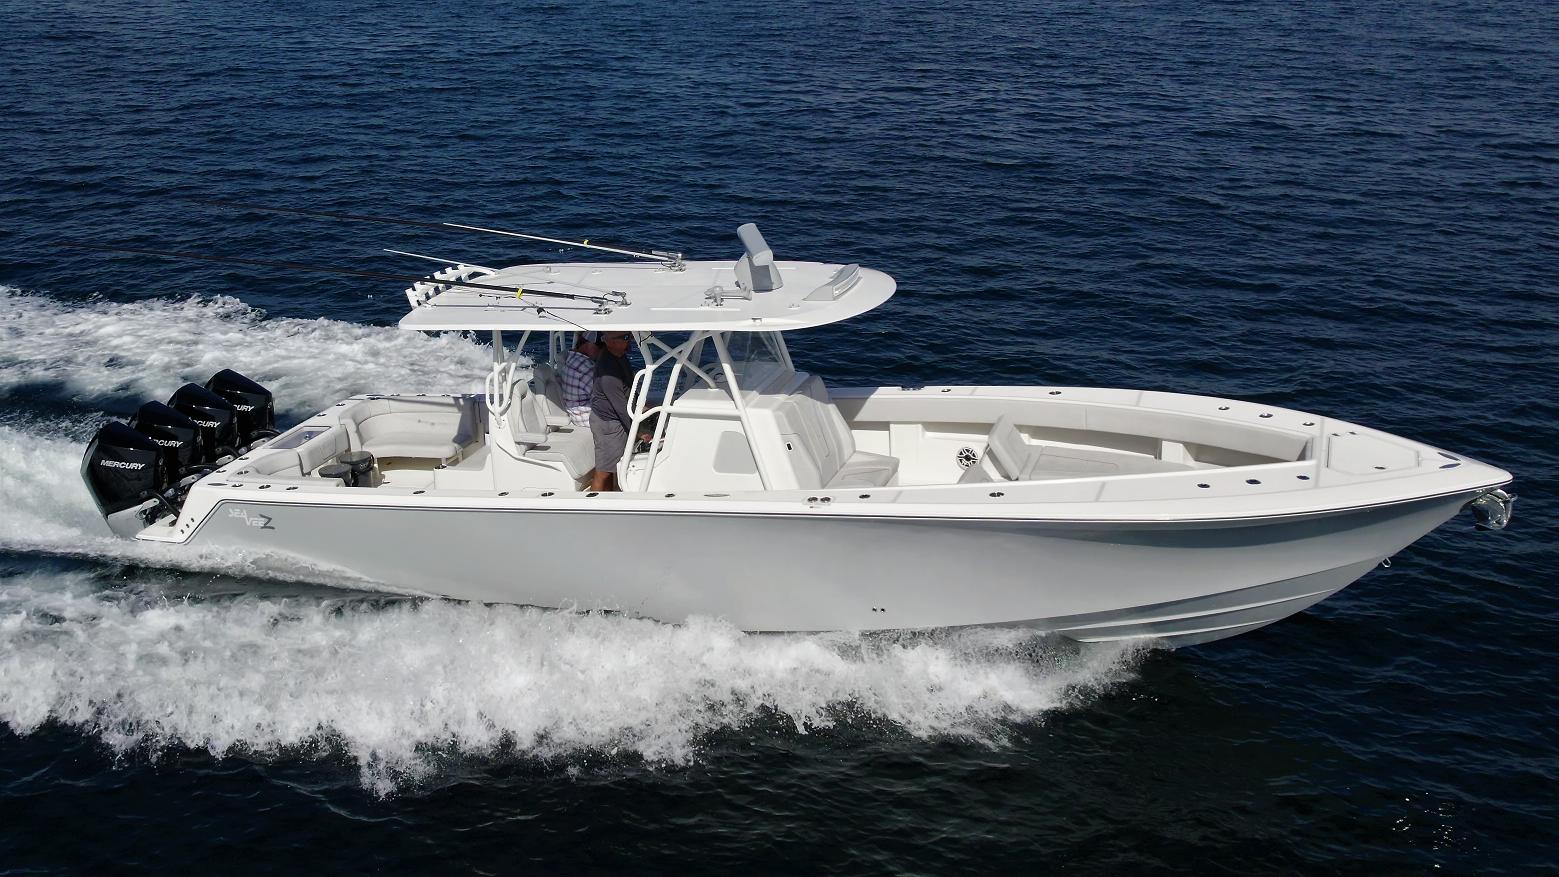 Center Console Boats For Sale Miami, Fort Lauderdale, Florida